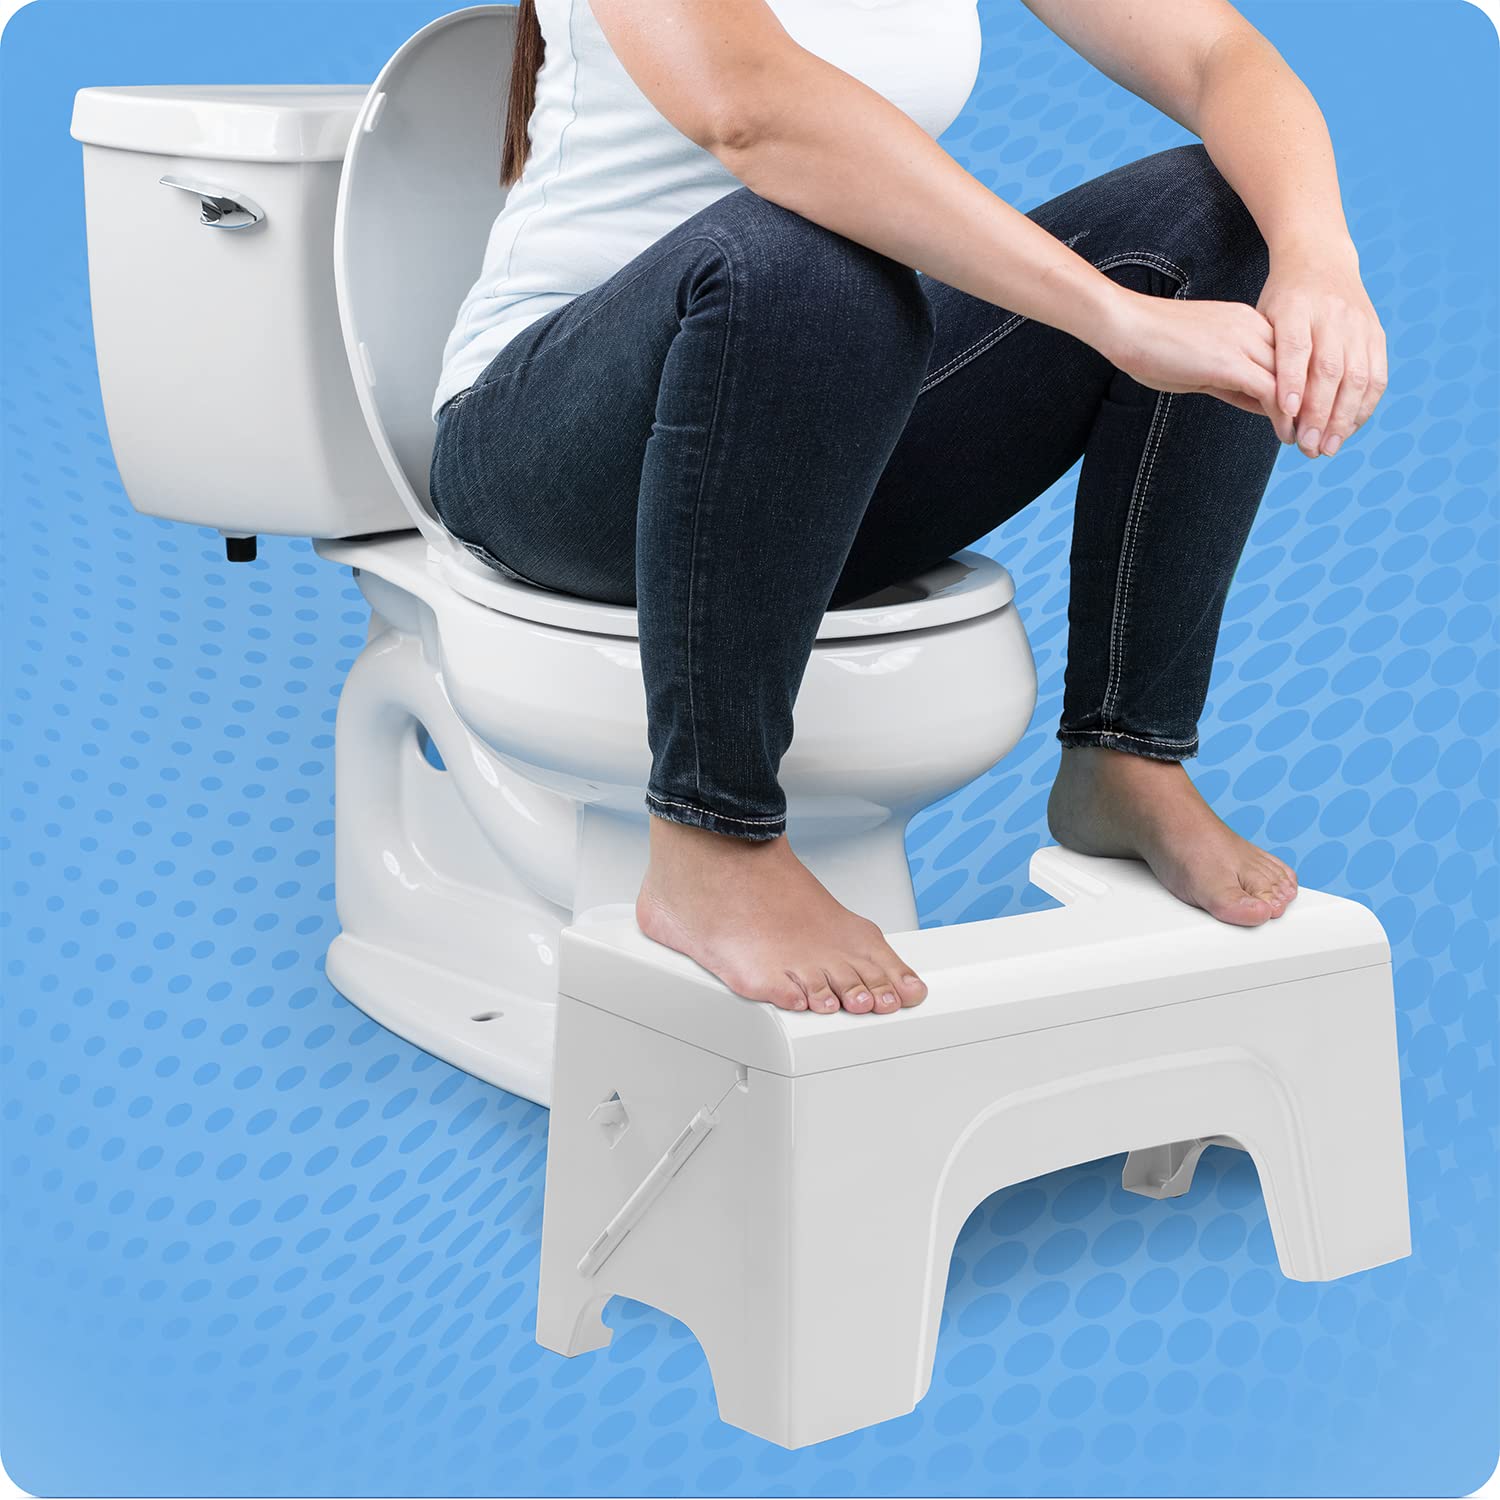 Squatty Potty Fold N Stow Compact Foldable Toilet Stool, White, 7